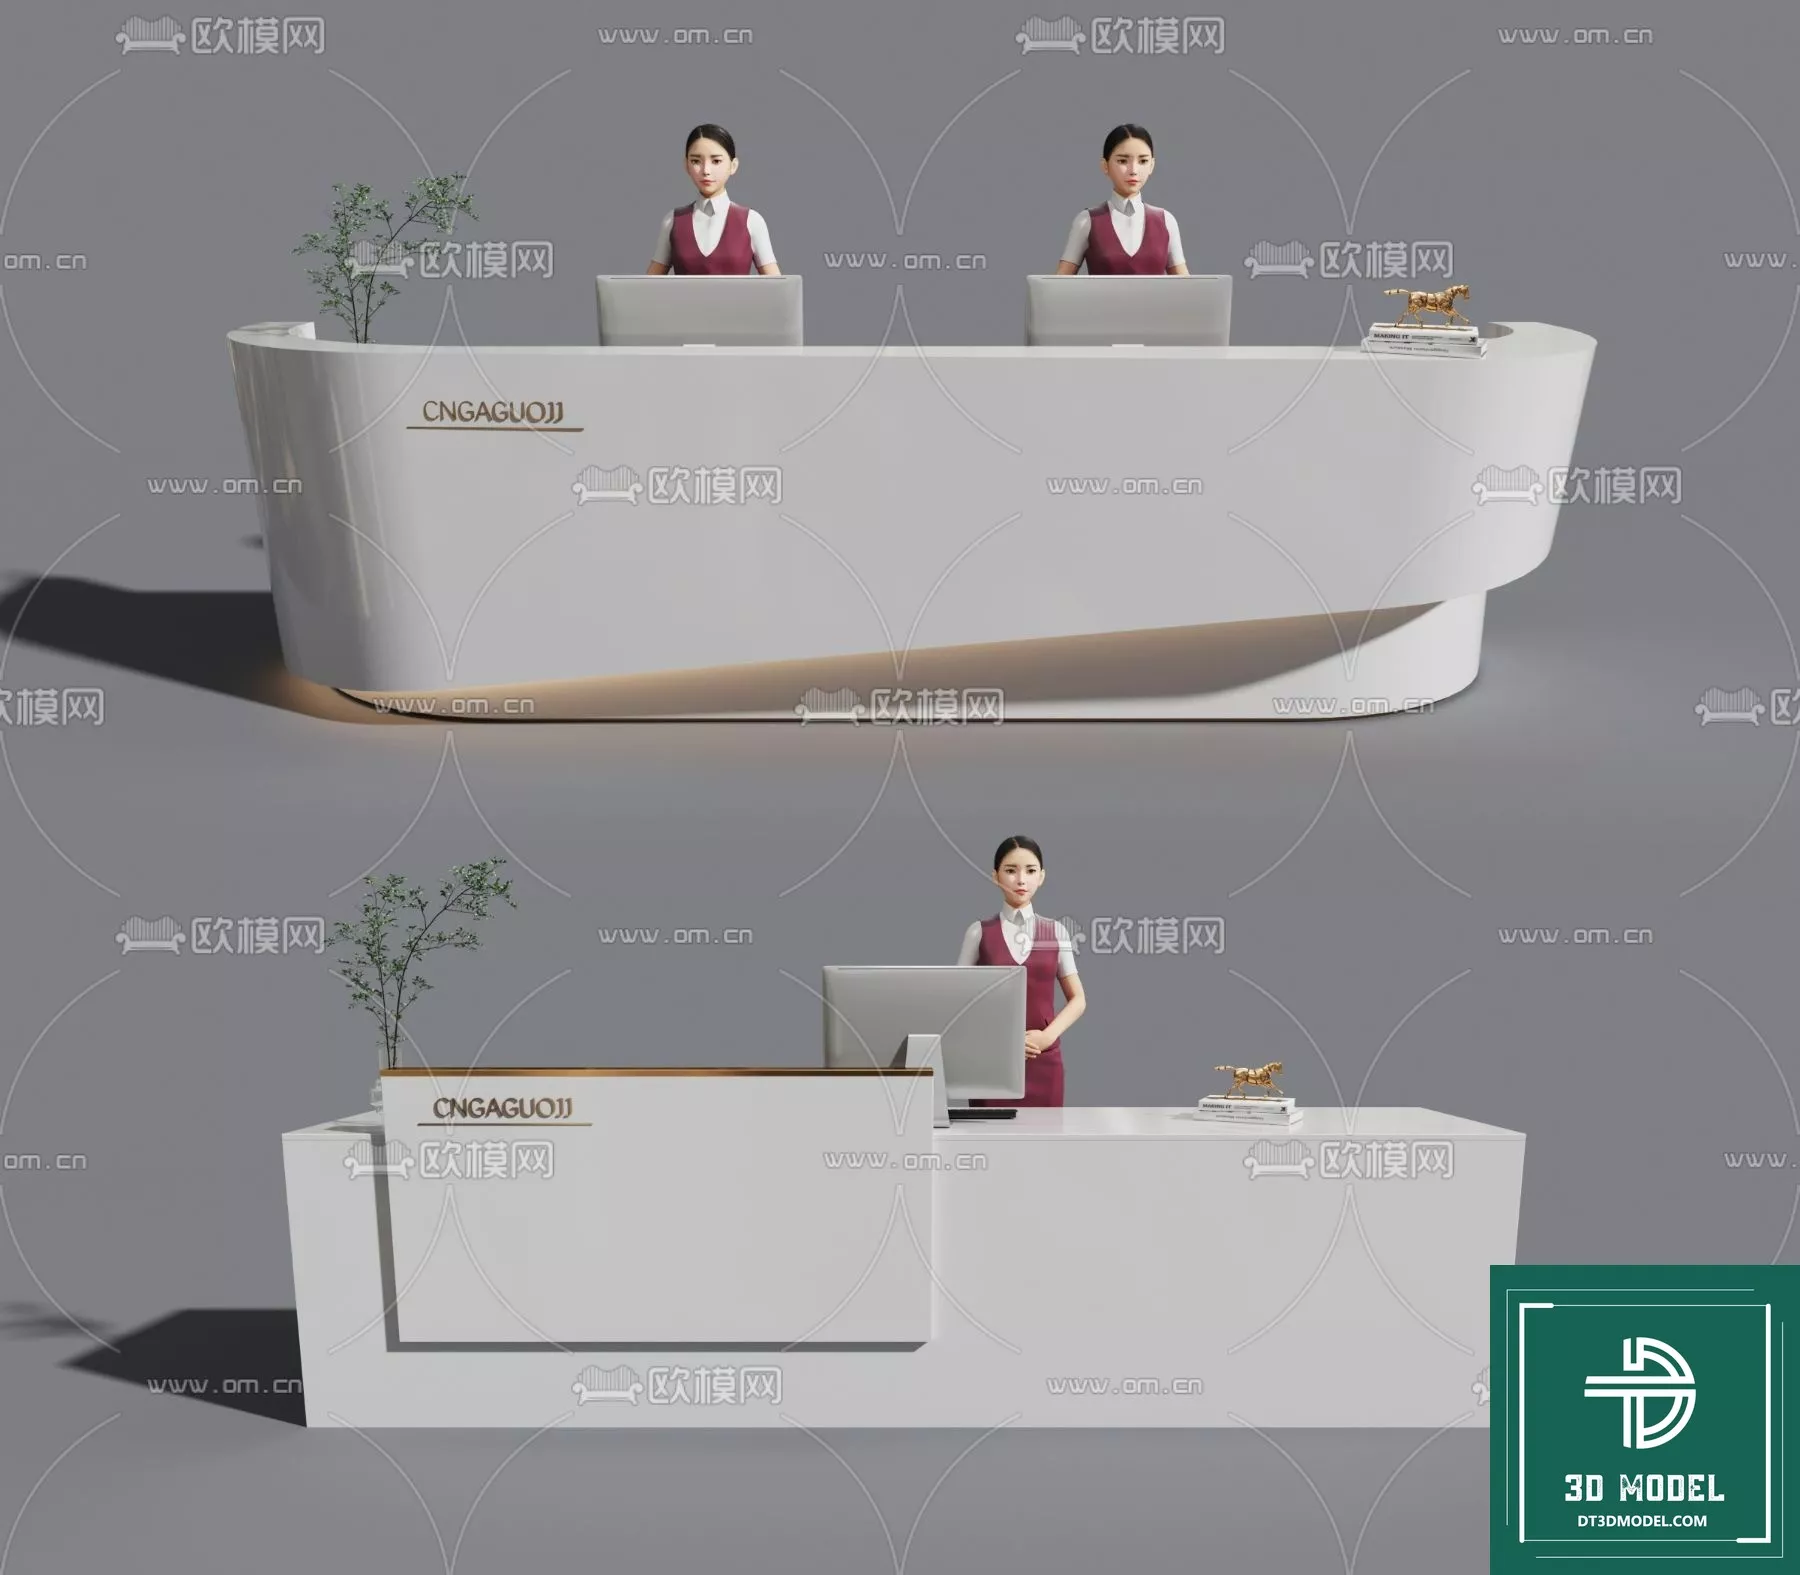 NEO CLASSIC RECEPTION - SKETCHUP 3D MODEL - VRAY OR ENSCAPE - ID17264